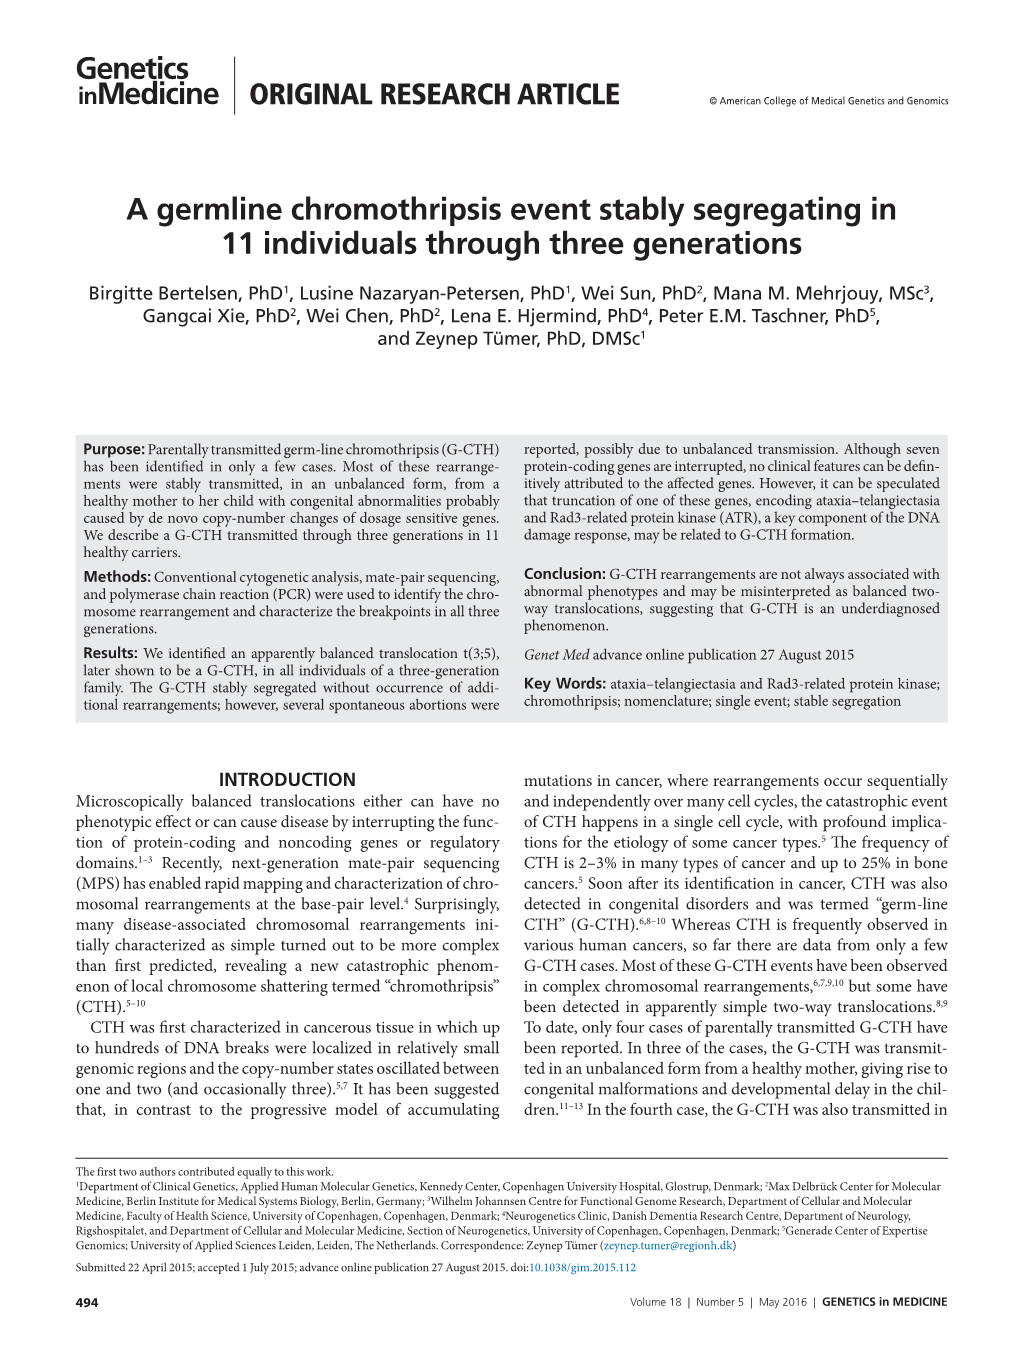 A Germline Chromothripsis Event Stably Segregating in 11 Individuals Through Three Generations